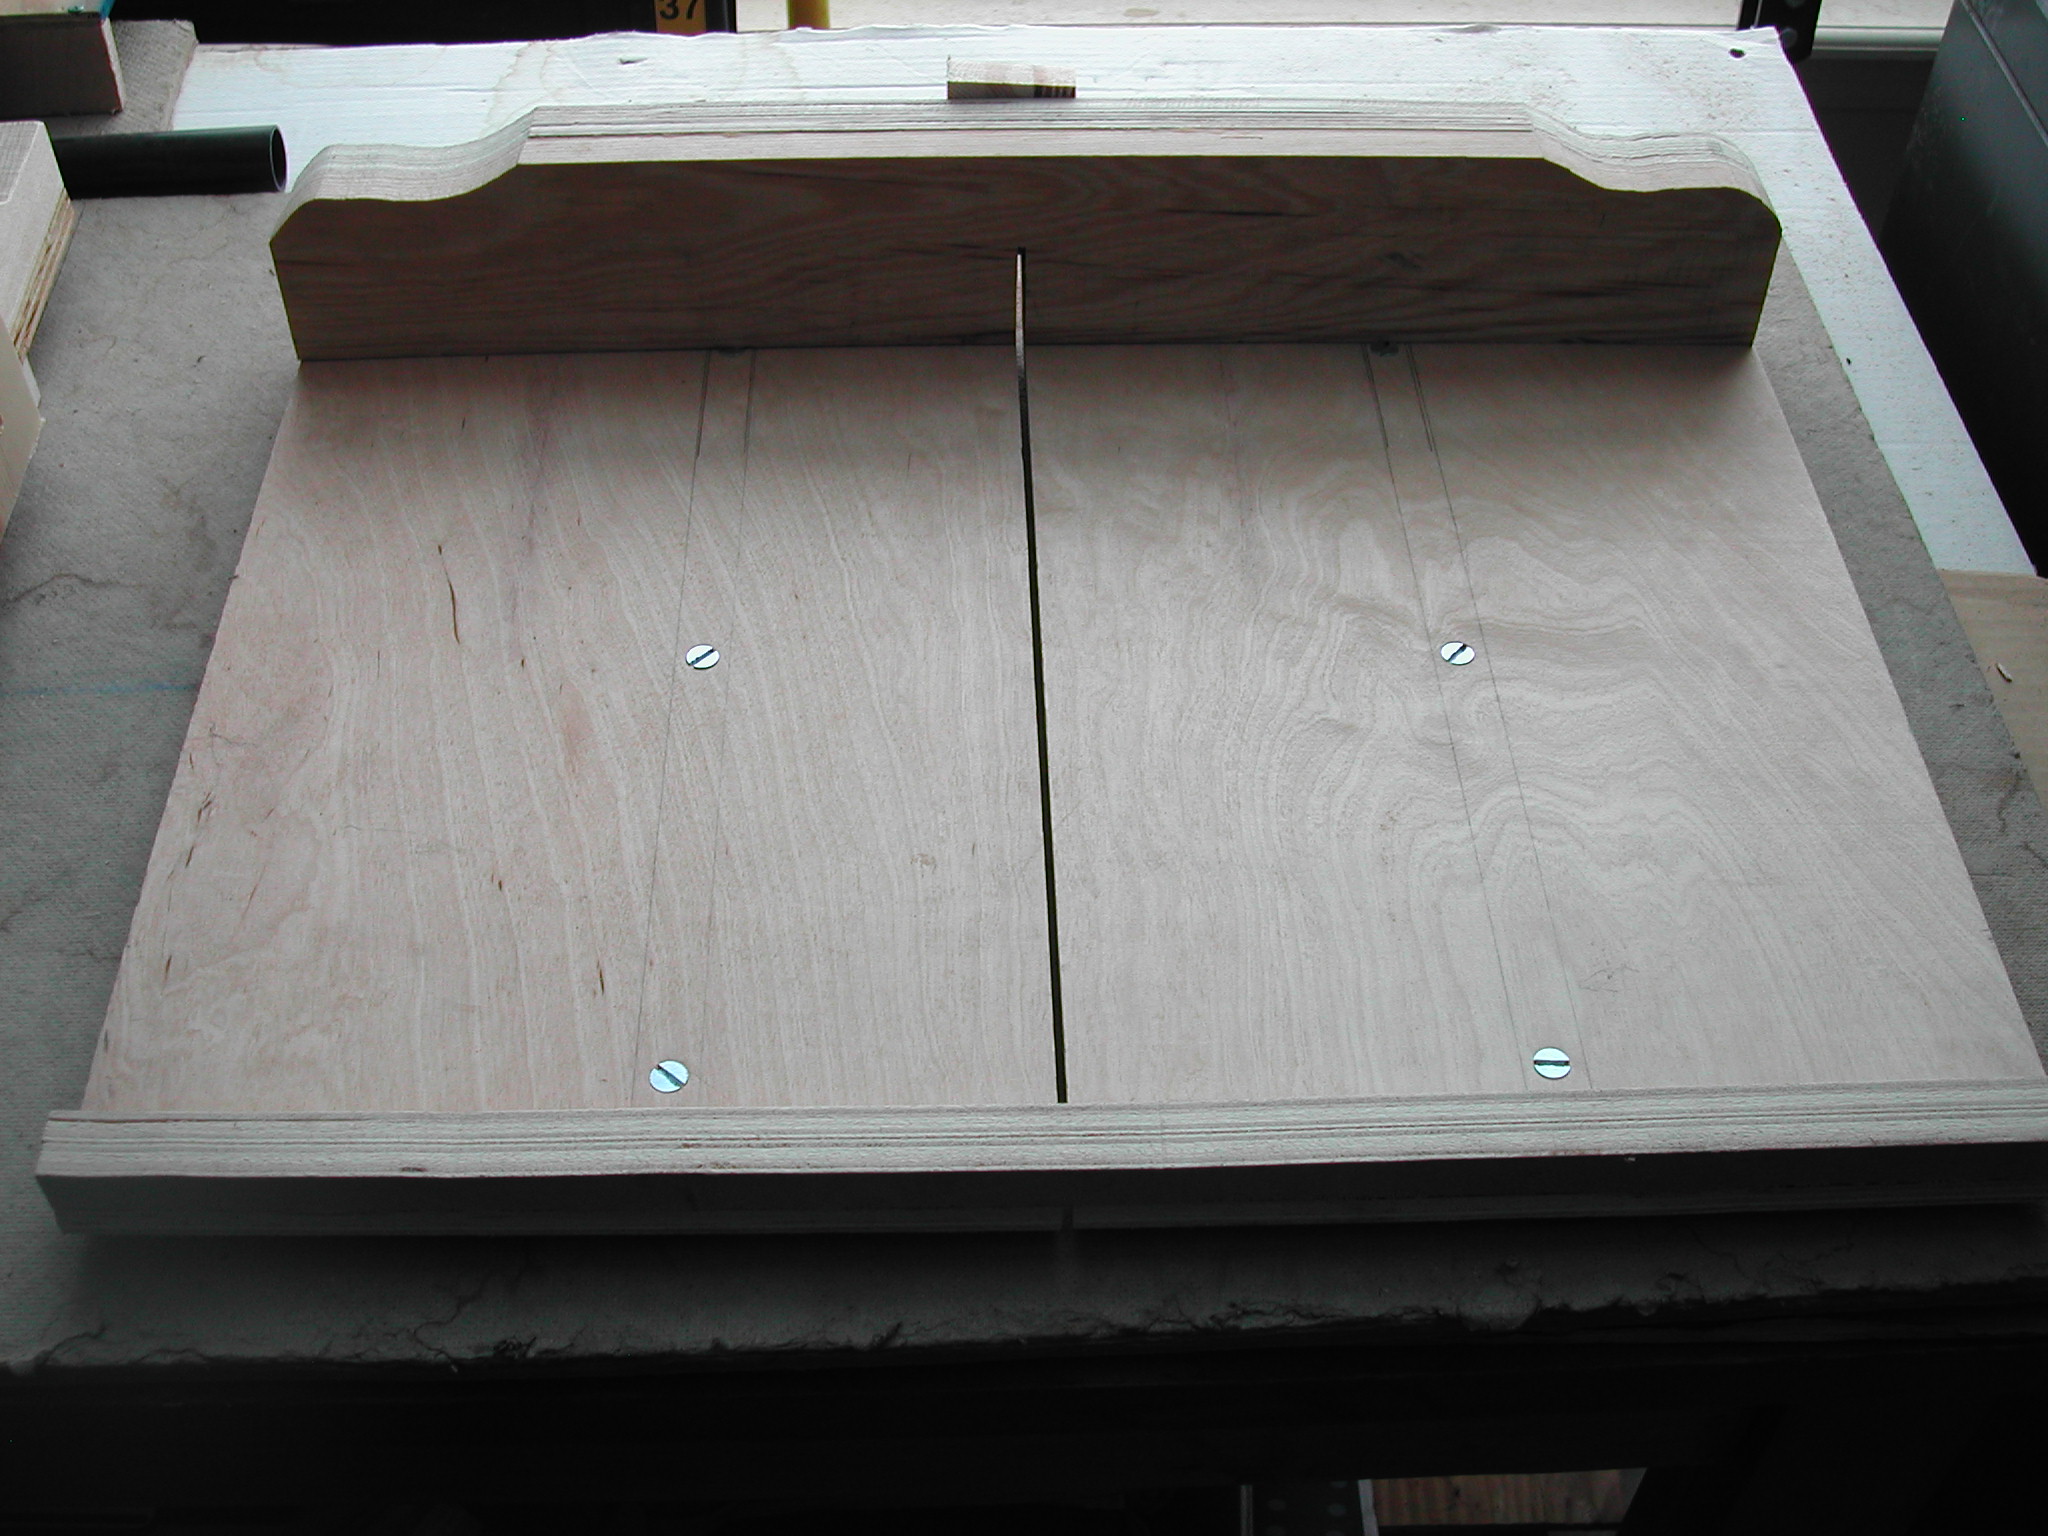 Crosscut and Miter Sleds